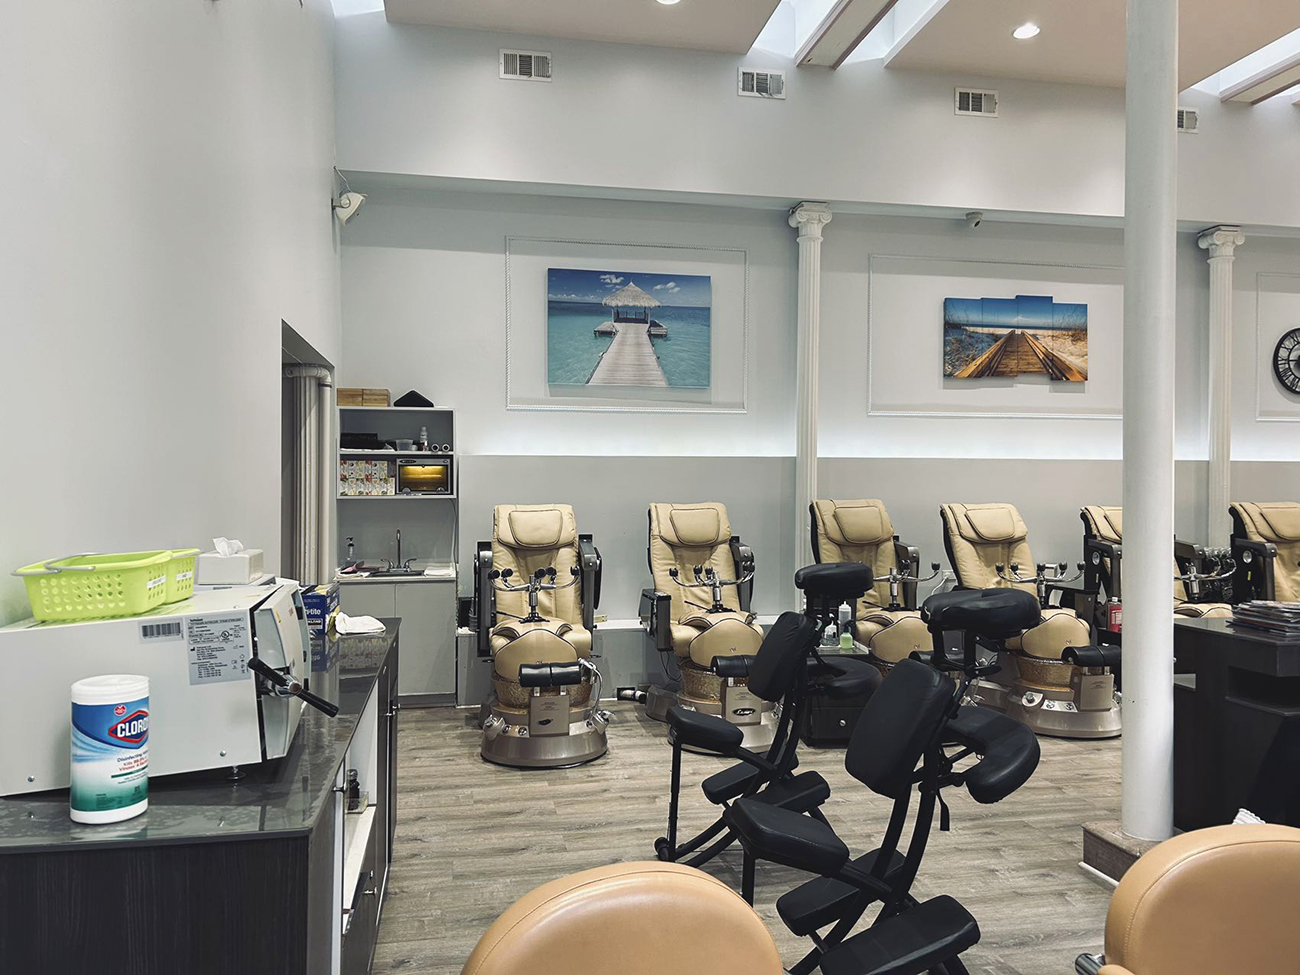 The interior of the nail salon has several luxury reclining chairs for pedicures.